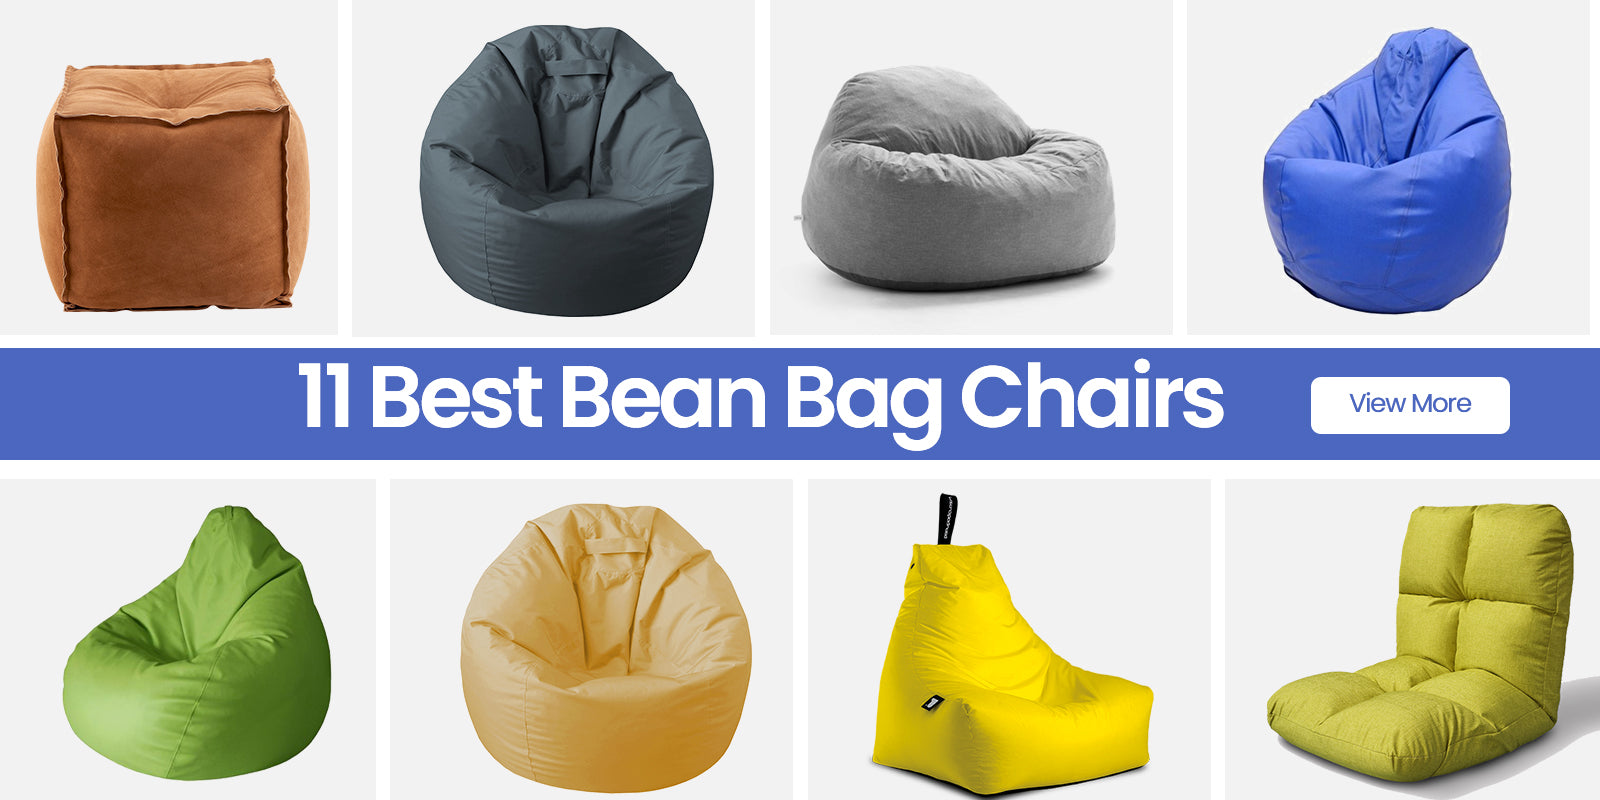 Best Bean Bag Chairs for Kids & Adults in 2022